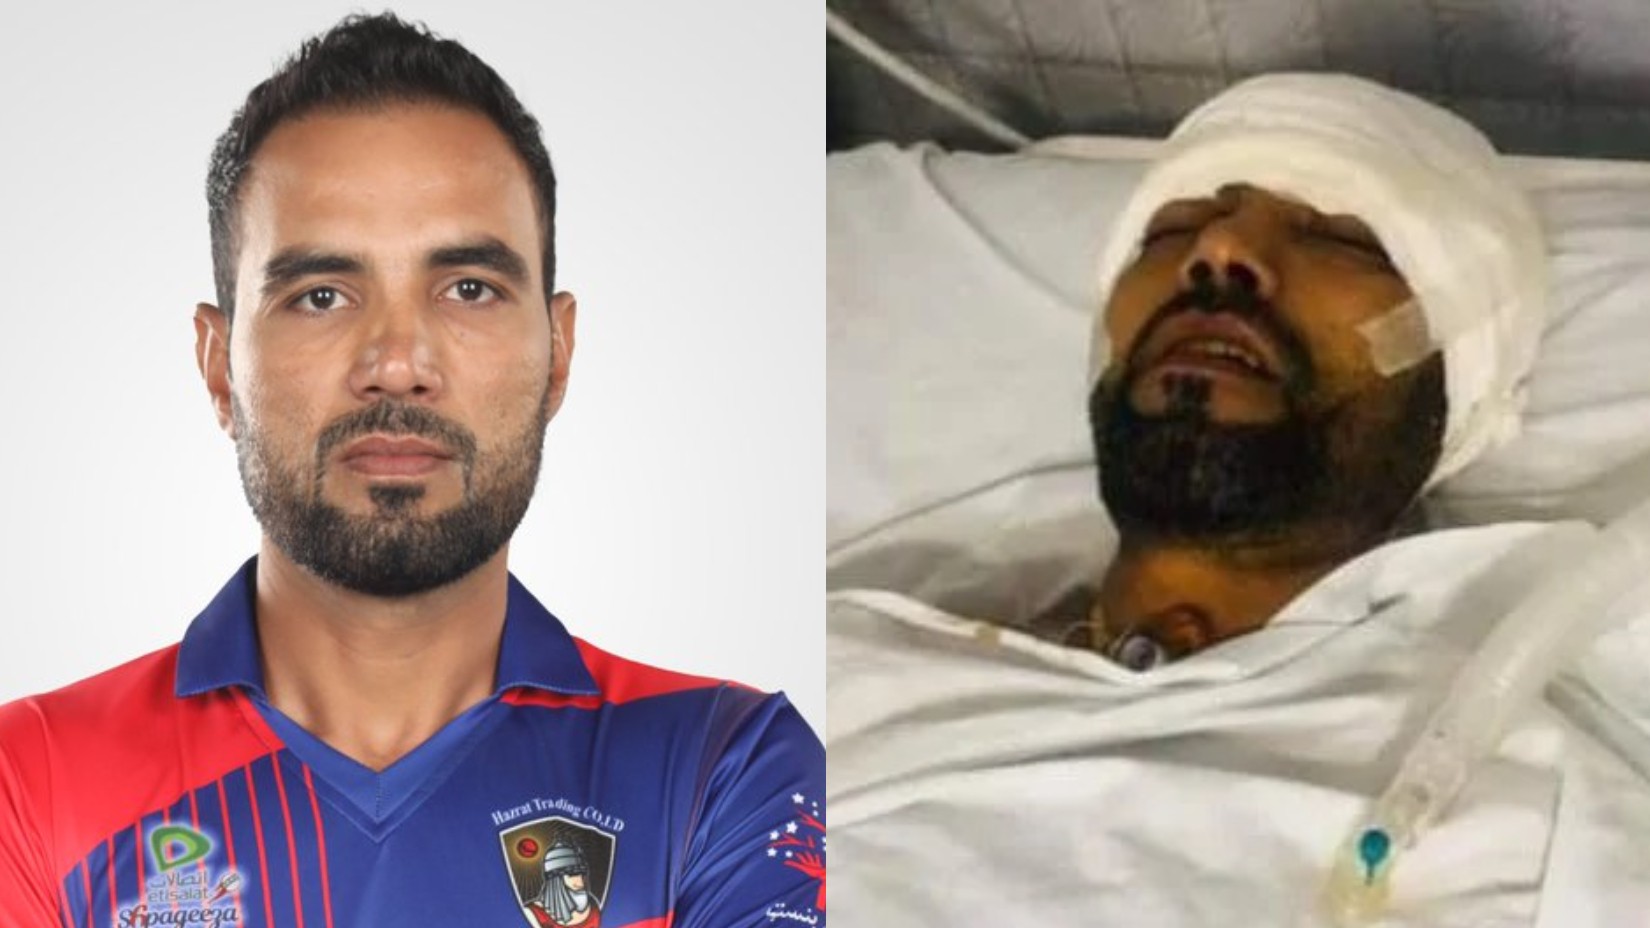 Afghanistan’s Najeeb Tarakai in critical condition after being hit by a car in Jalalabad